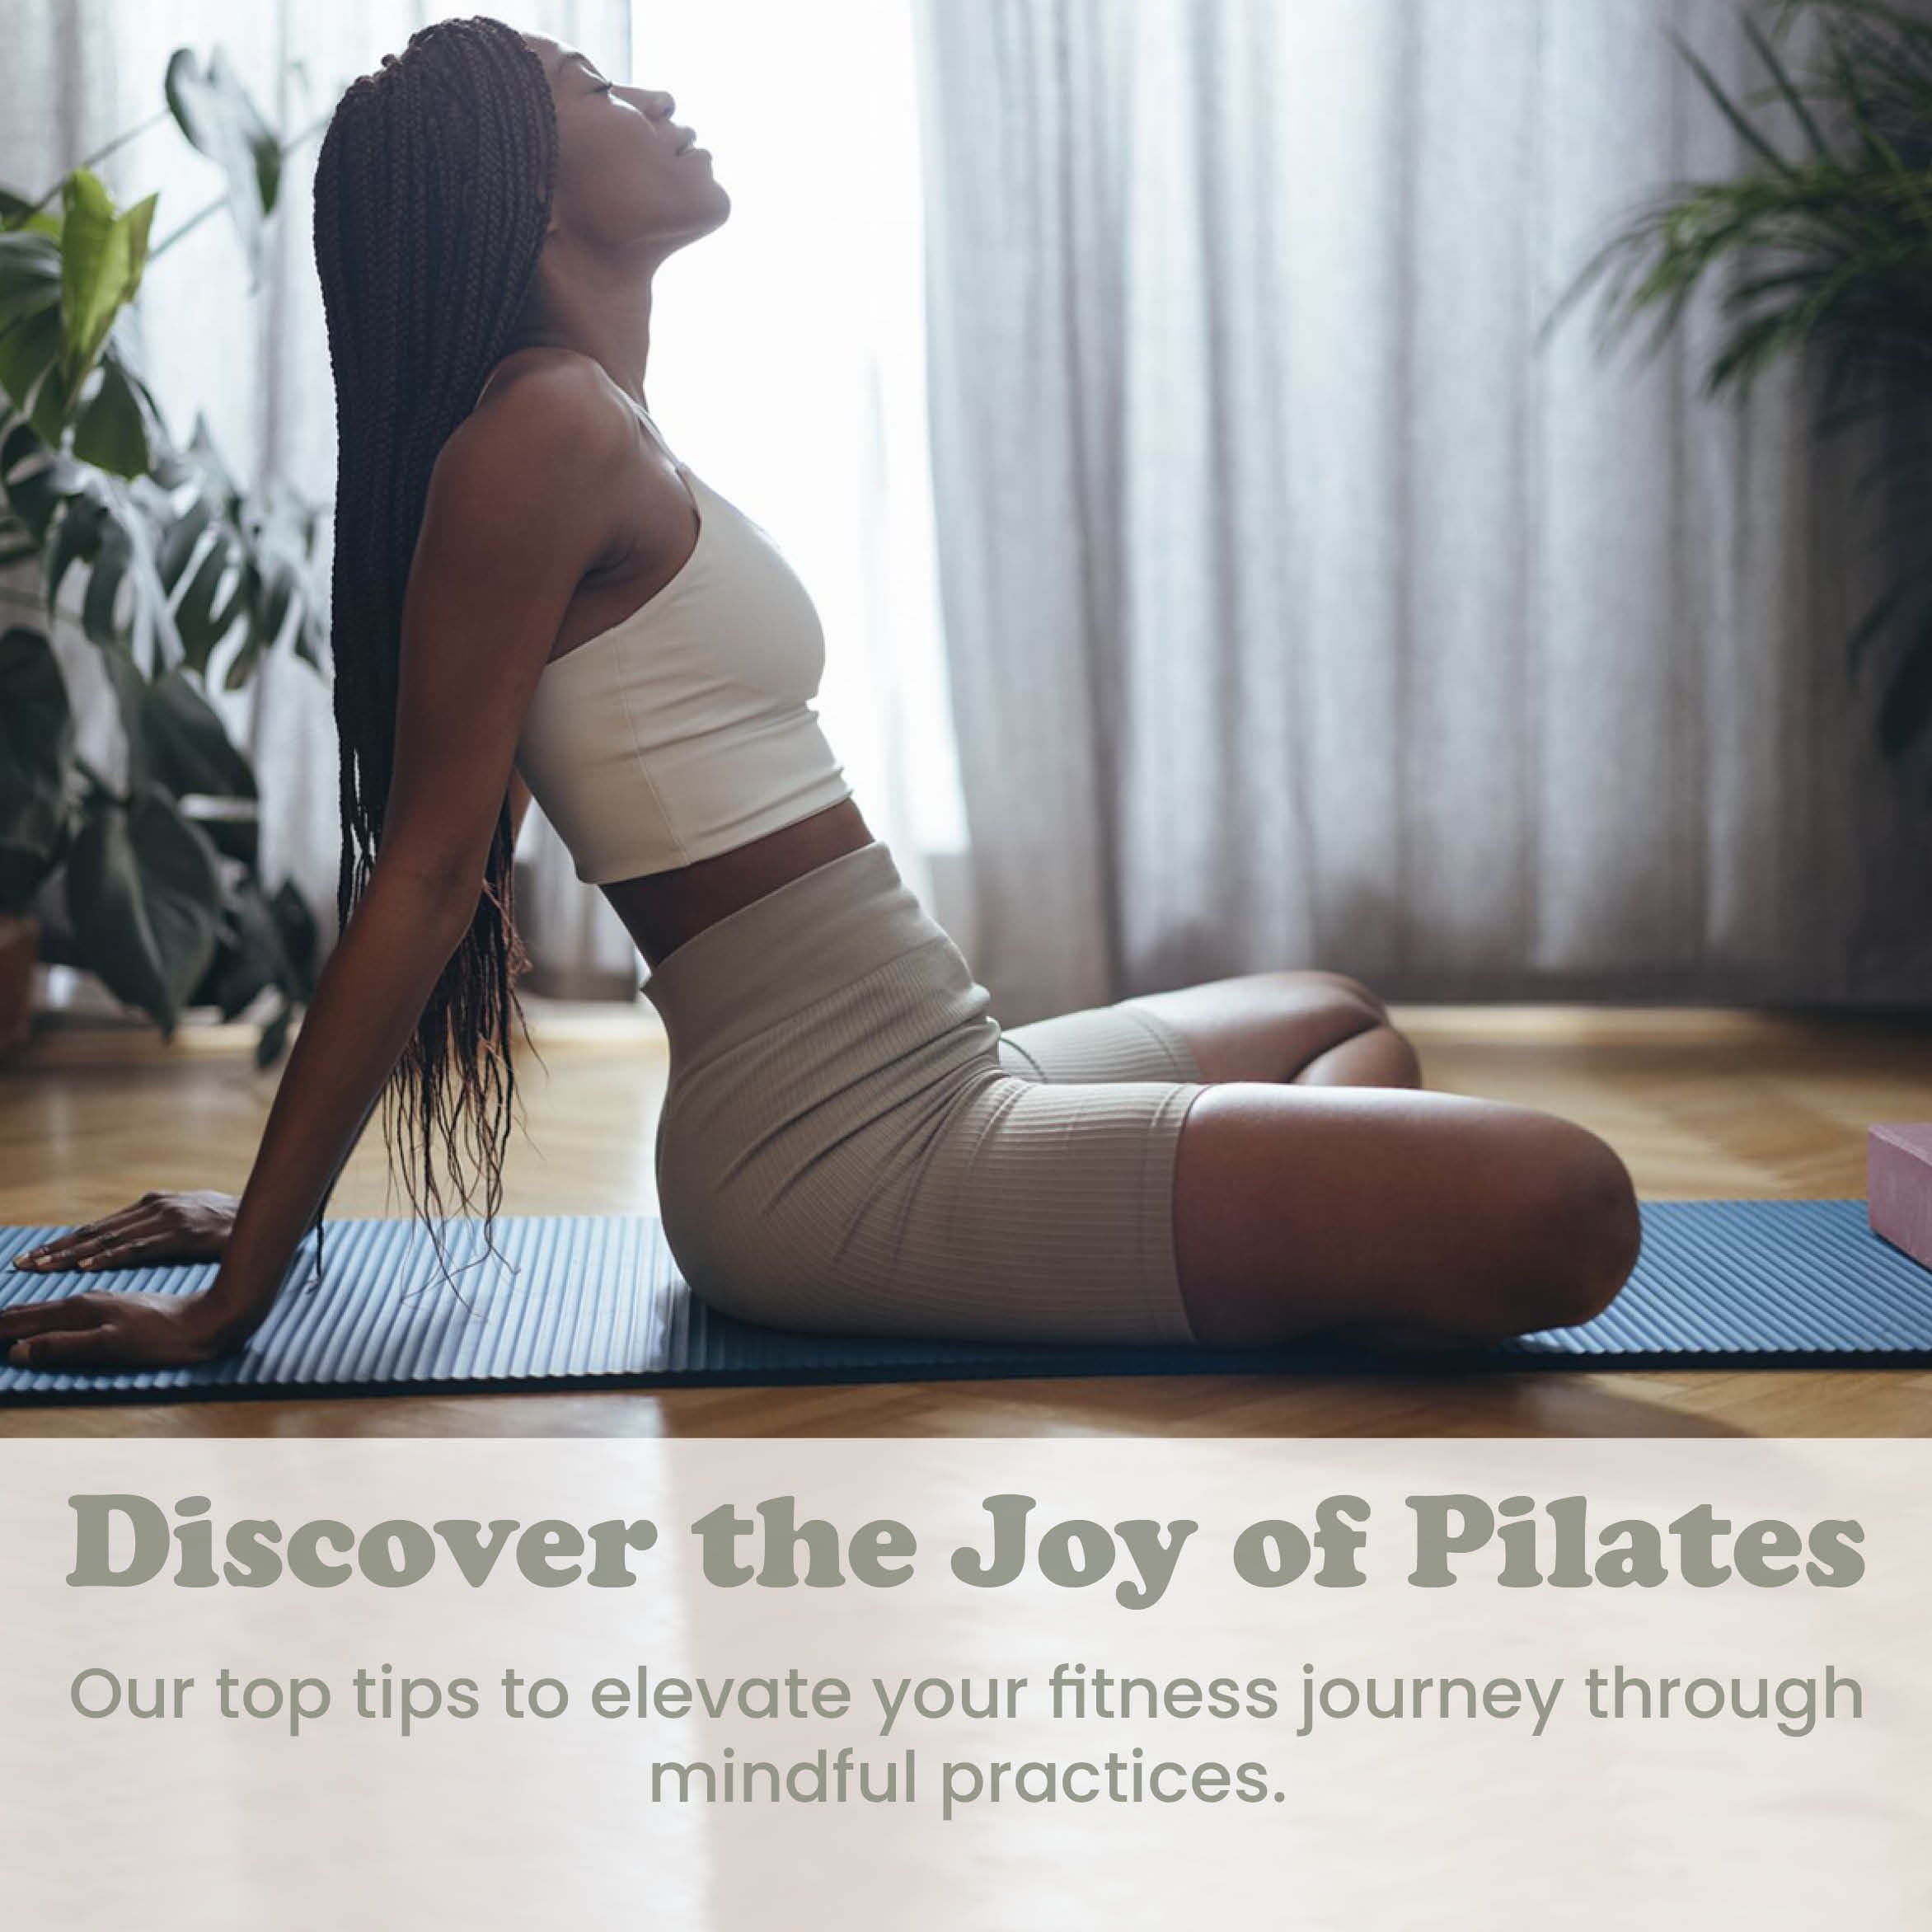 Discover the Joy of Pilates: 5 Tips to Elevate Your Fitness Journey